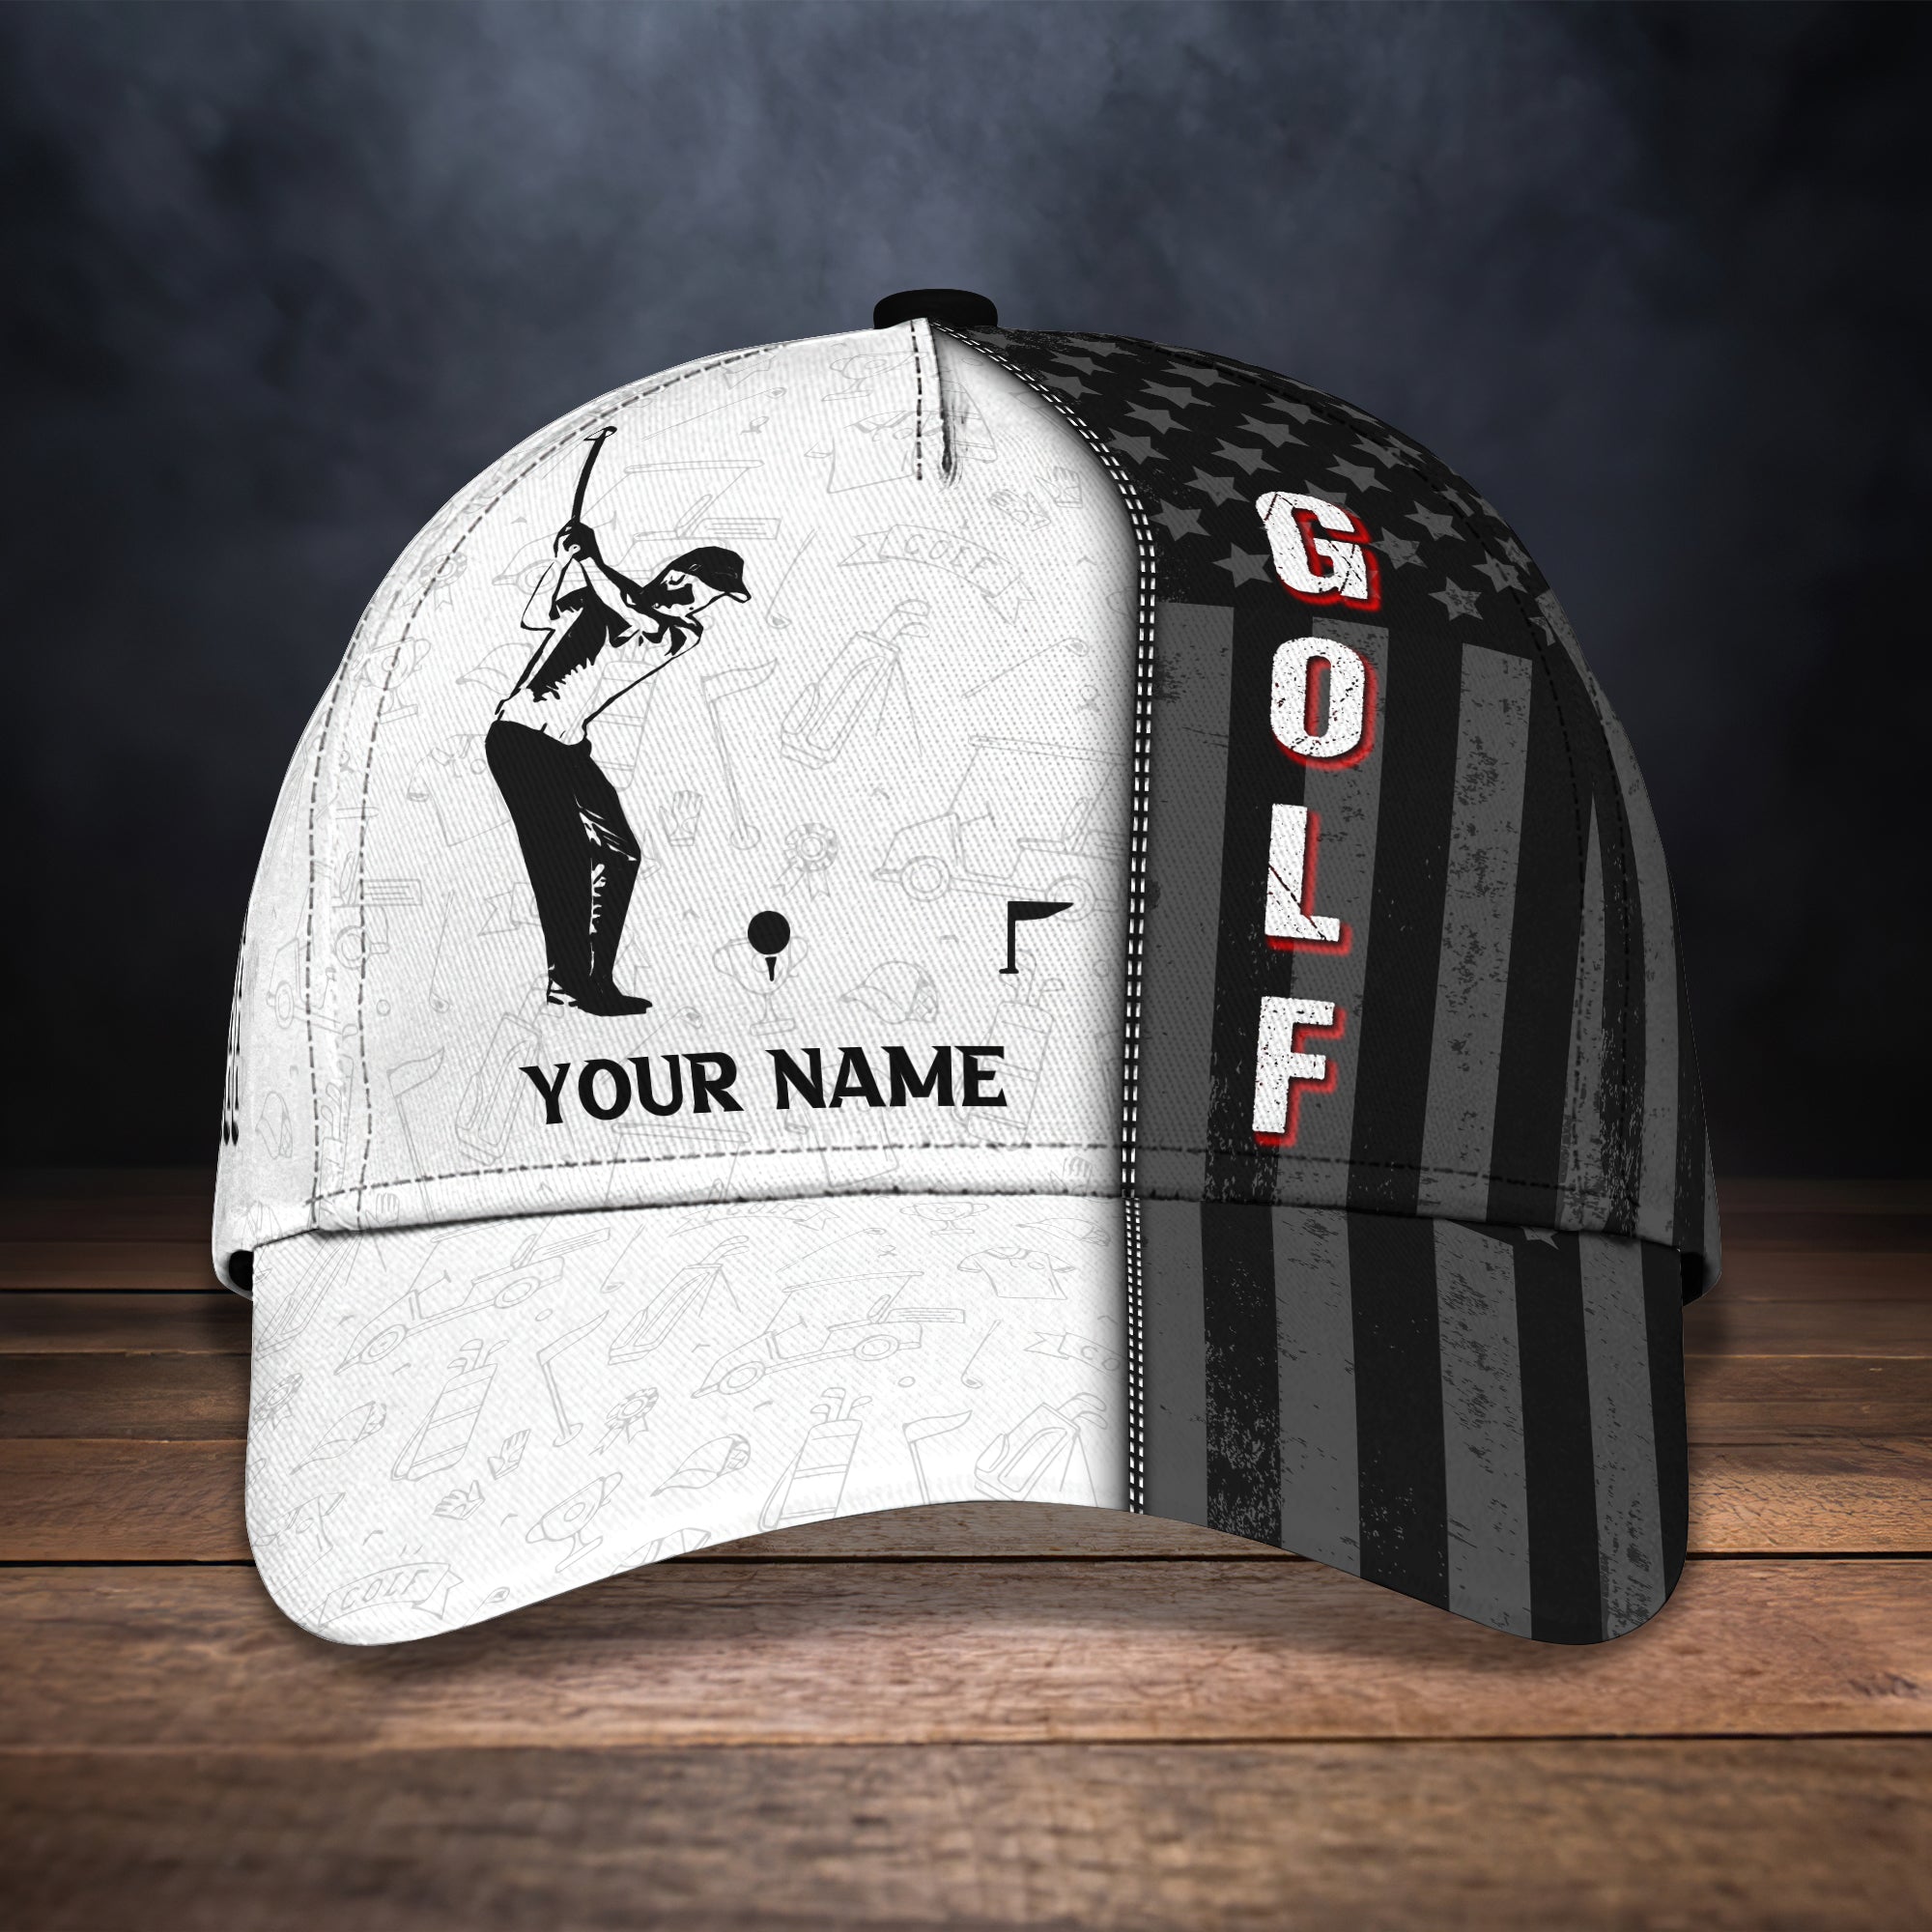 Golf - Personalized Name Cap001 - ATM2K